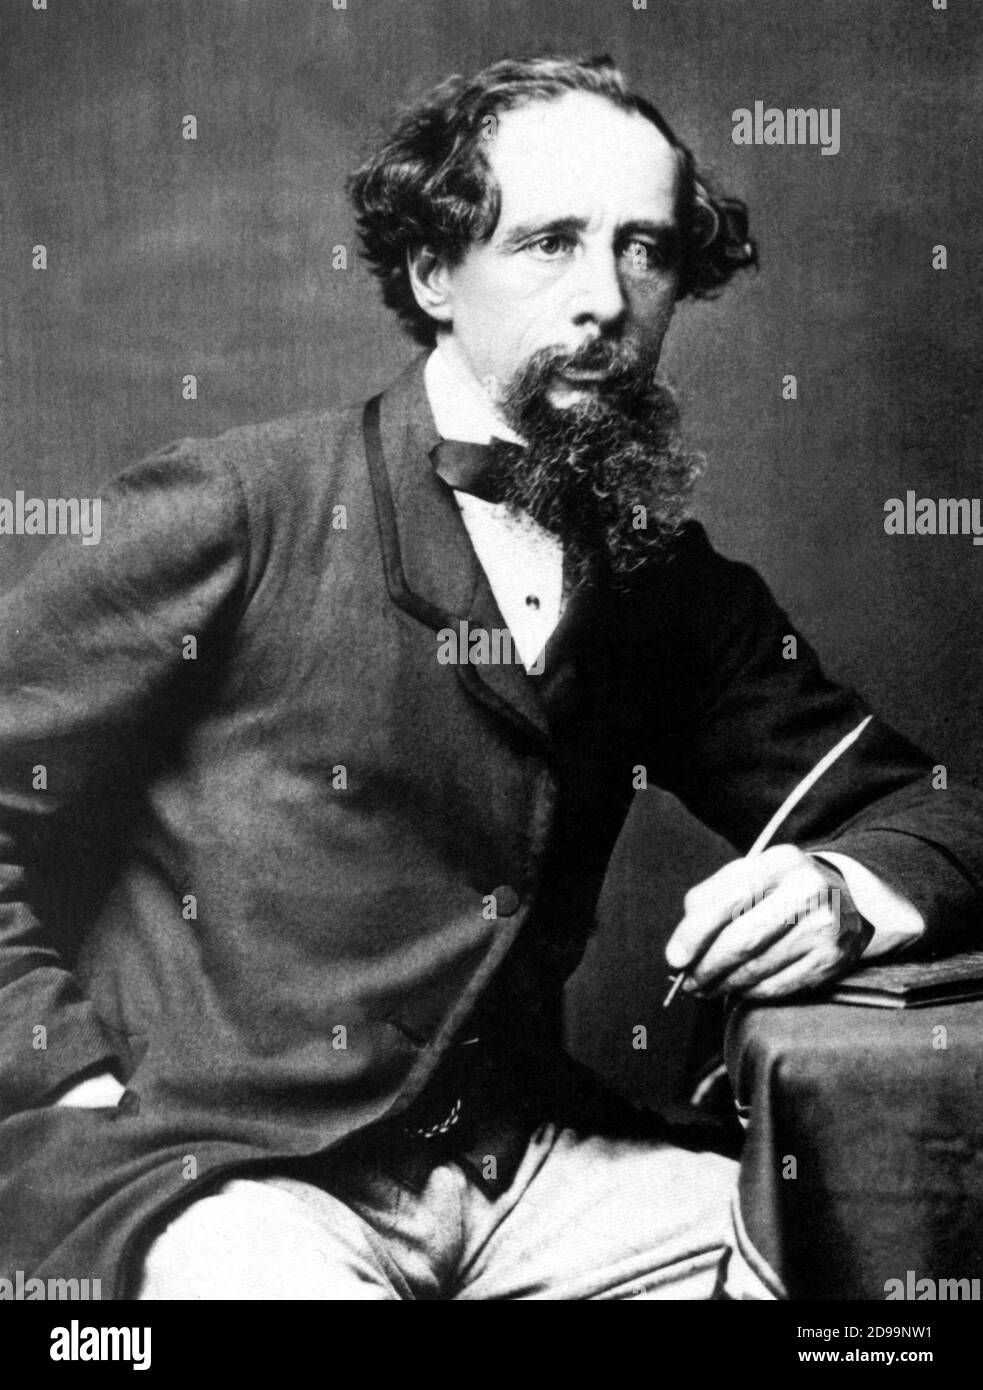 The english writer CHARLES DICKENS ( Portsmouth 1812 - Gad's Hill , Kent  1870 ) , author of " Oliver Twist " ( 1837 ) , "